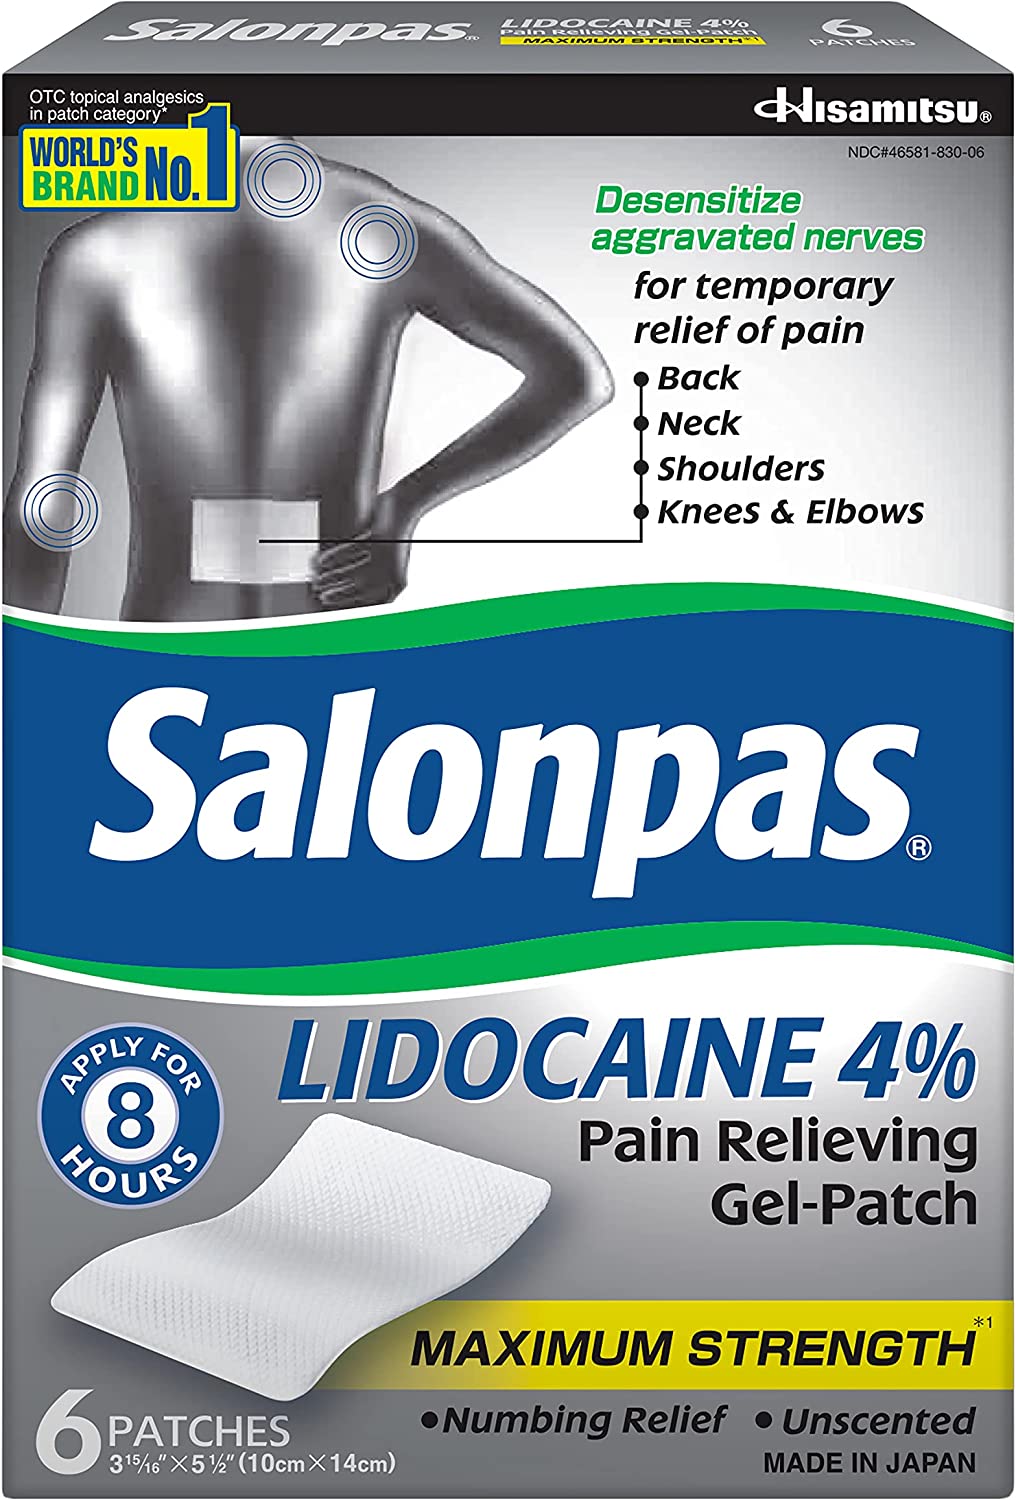 6-Count Salonpas Lidocaine 4% Pain Relieving Gel Patches $6.08 w/ S&S + Free Shipping w/ Prime or on orders over $25